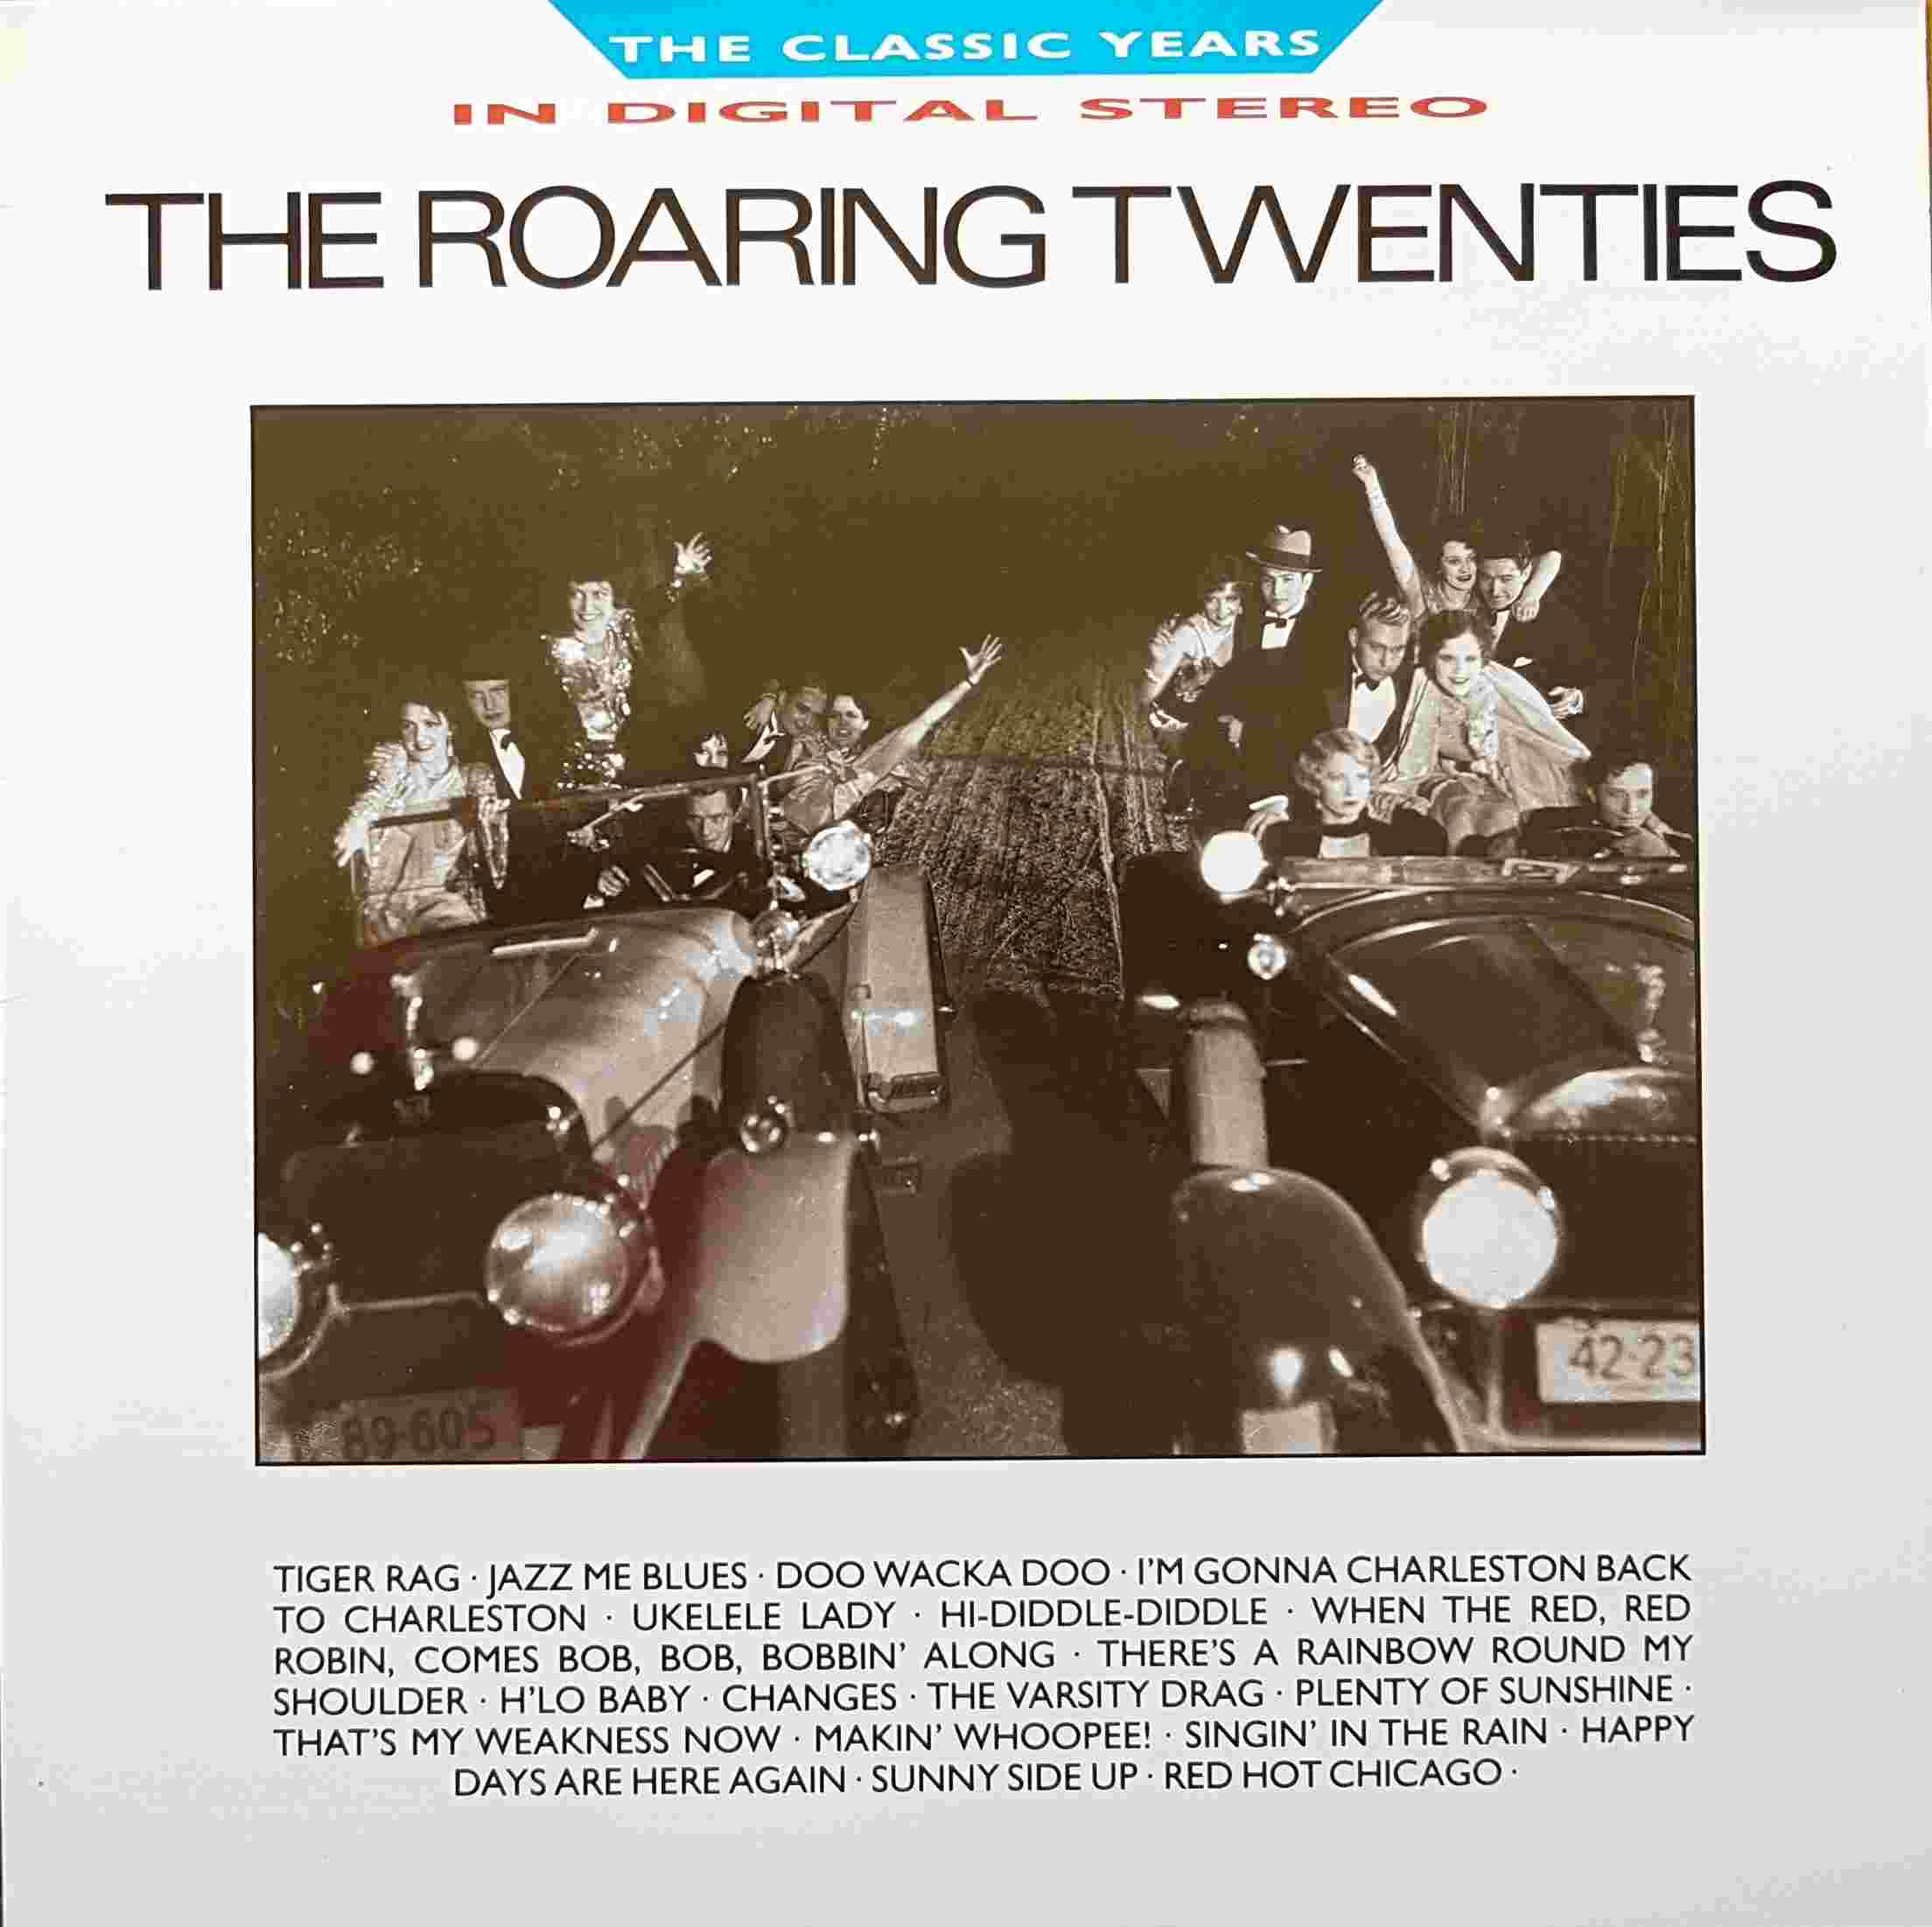 Picture of REB 704 Classic years - The roaring twenties by artist Various